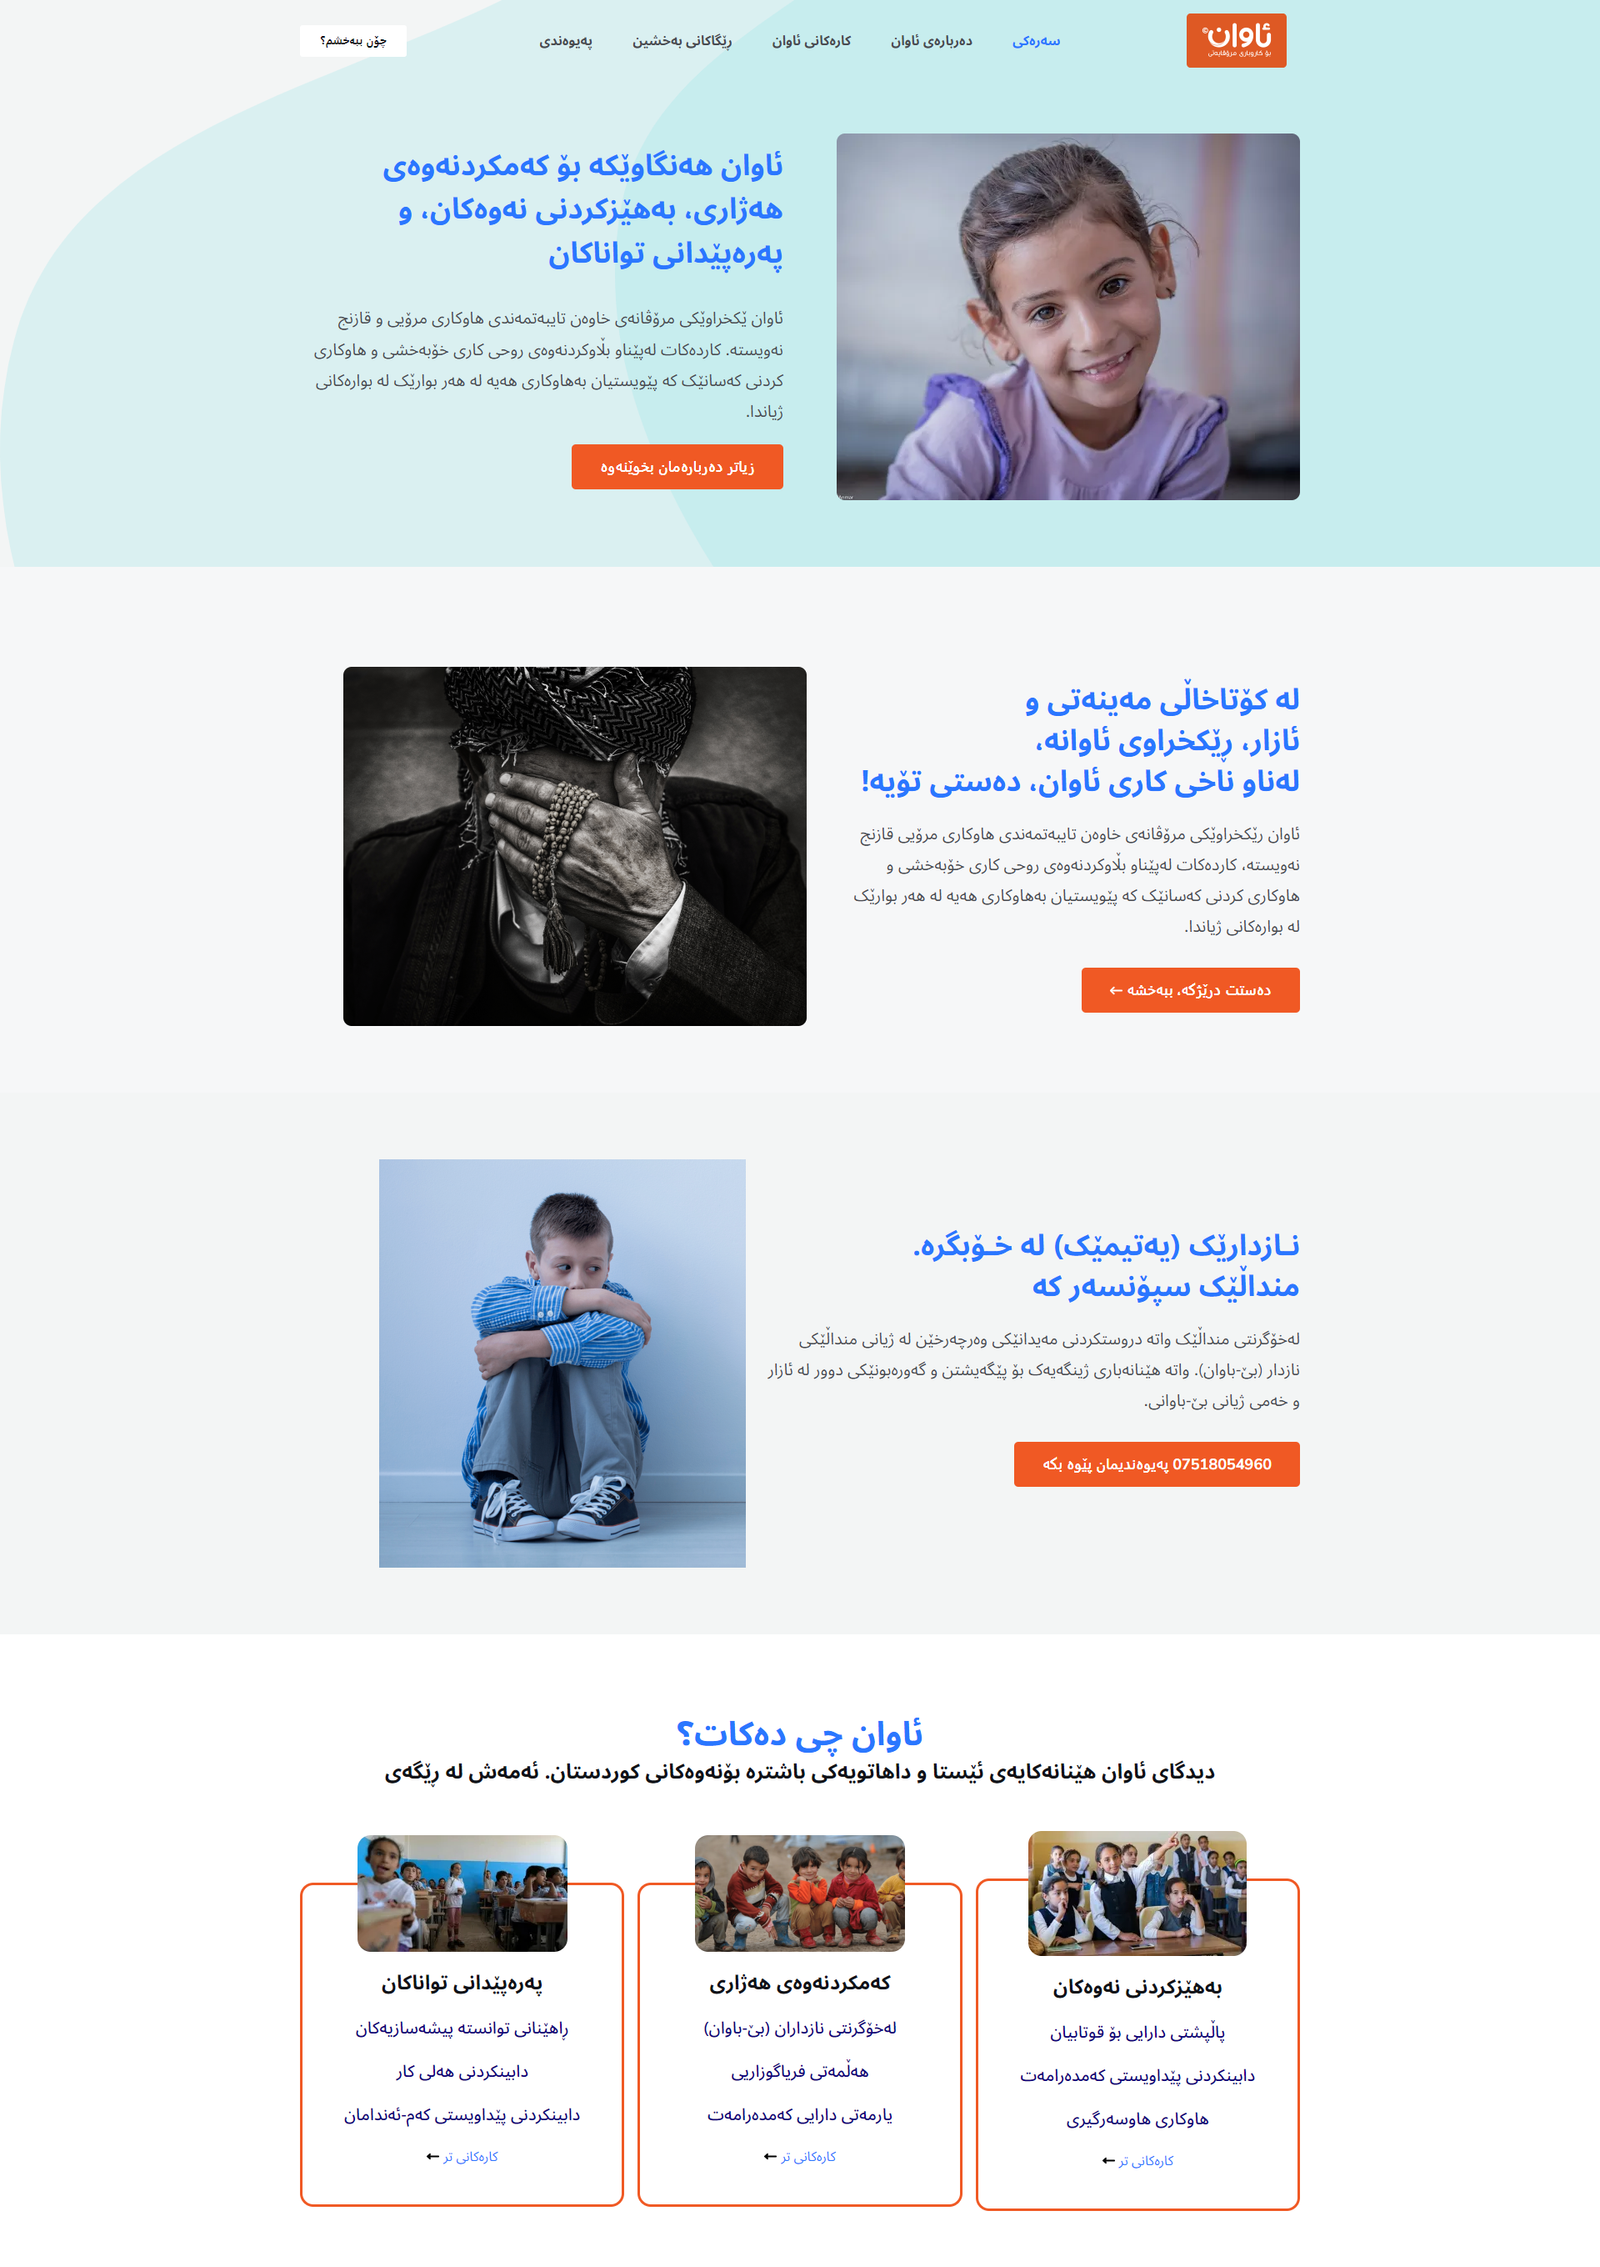 awanhumanity-org- website built by Web For Scholars